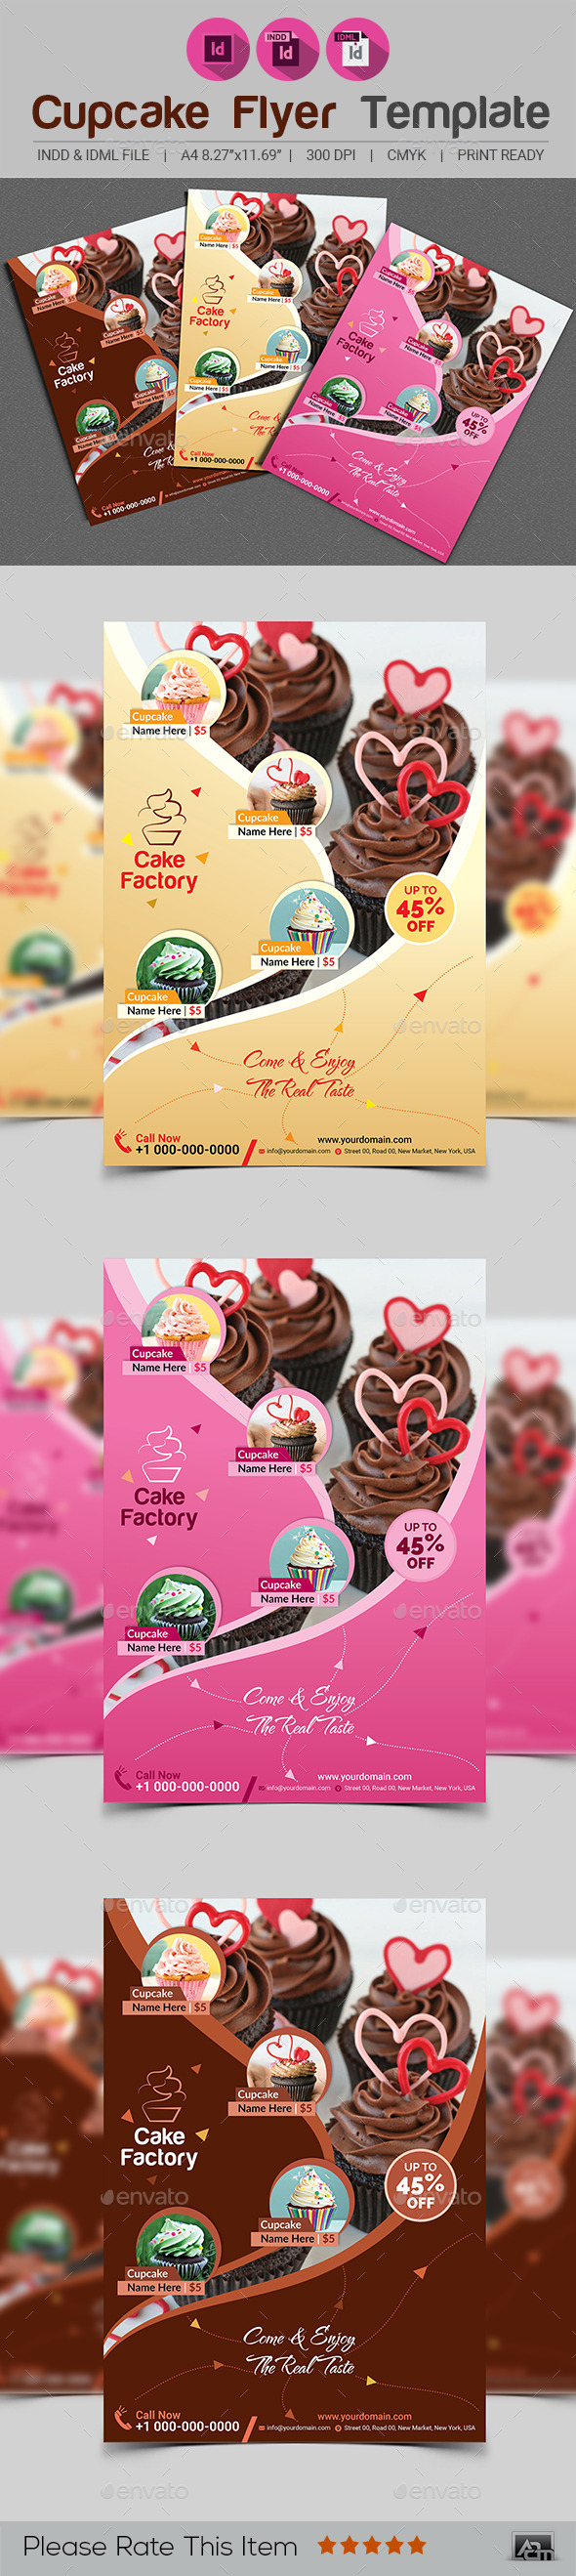  Cupcake  Flyer  Template V2 by aam360 GraphicRiver